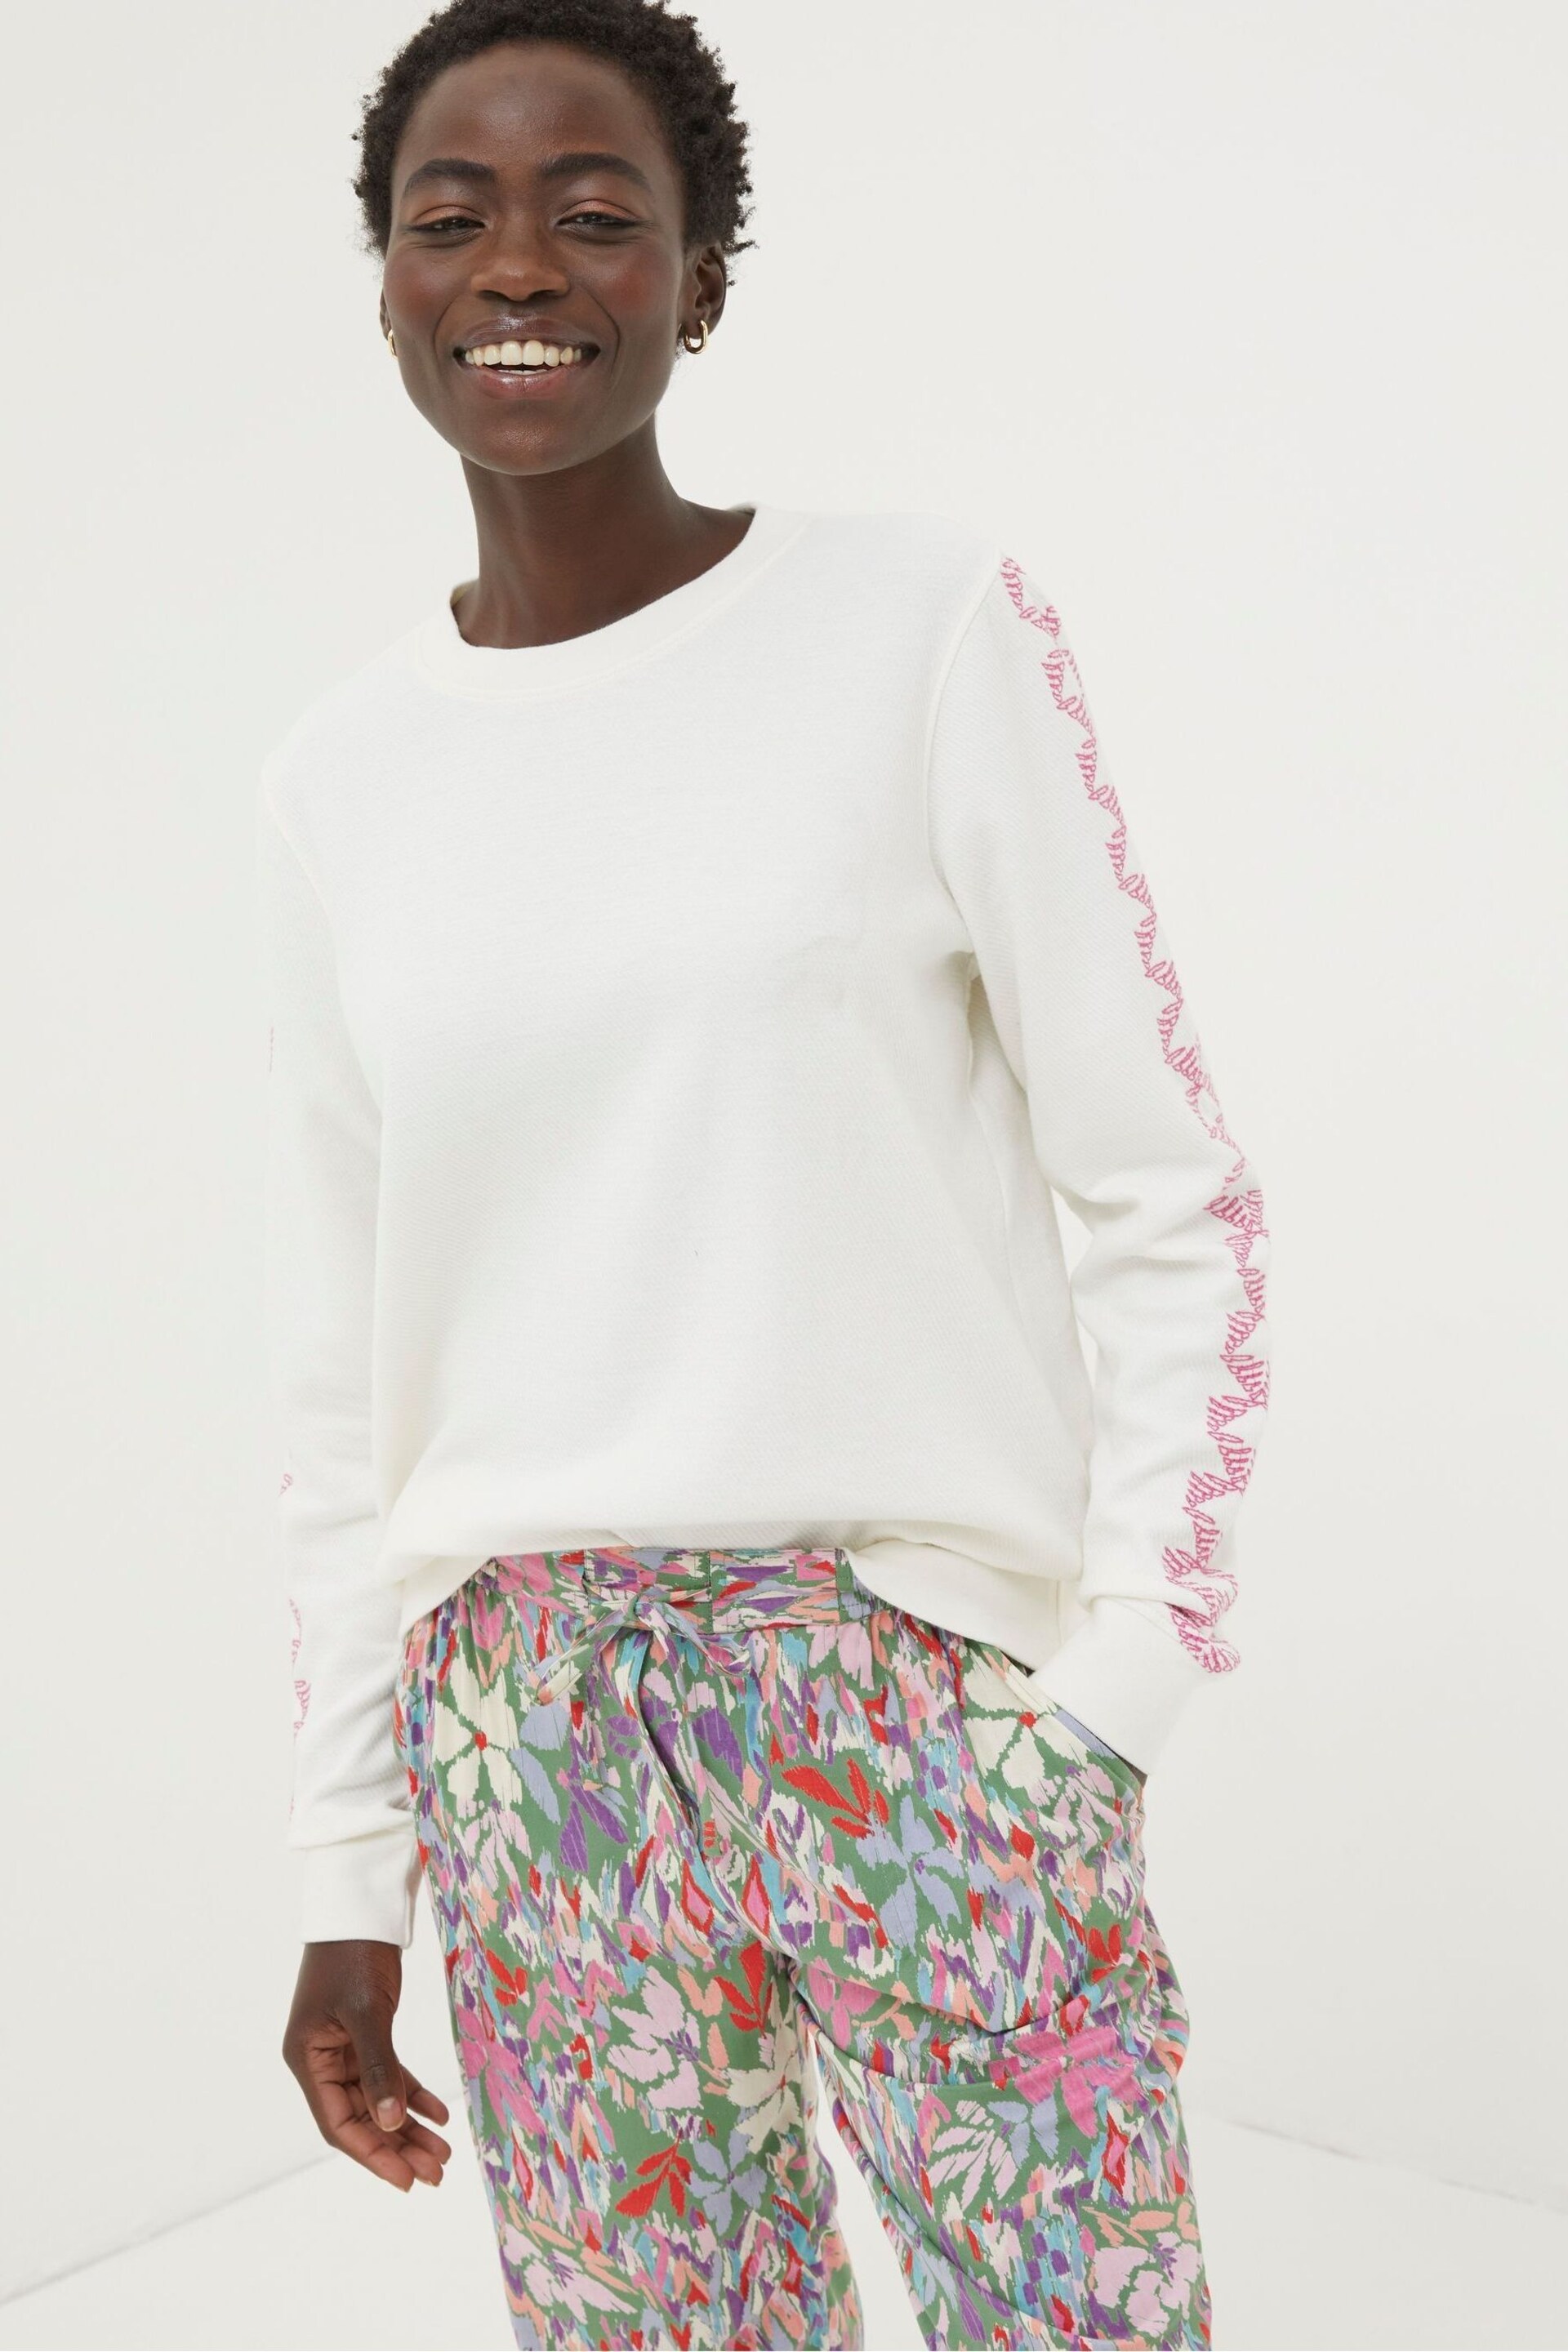 FatFace Natural Eve Embroidered Sleeve Sweatshirt - Image 1 of 5